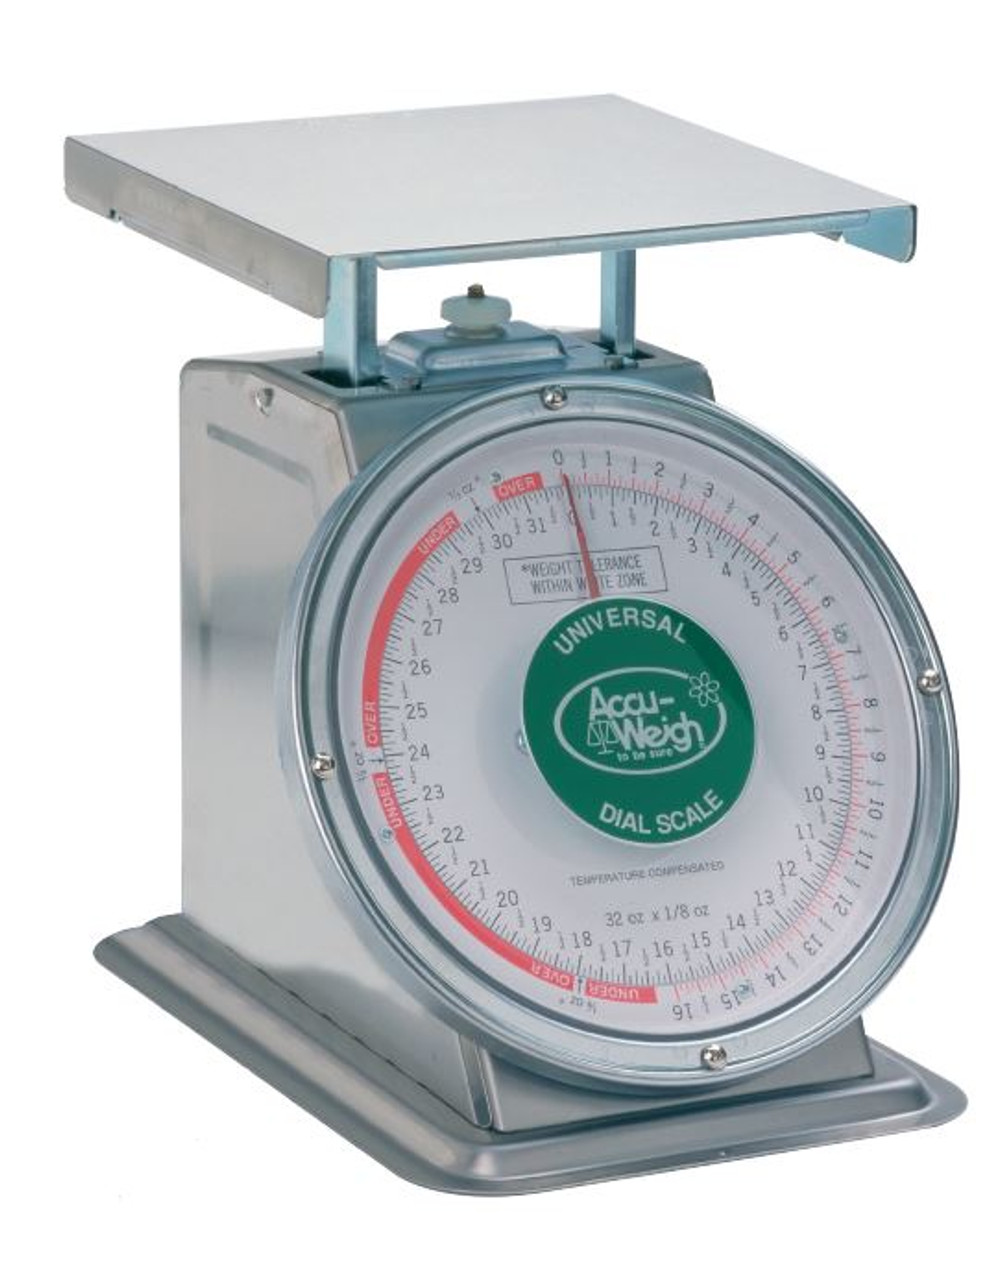 Yamato Commercial Kitchen Scale - appliances - by owner - sale - craigslist